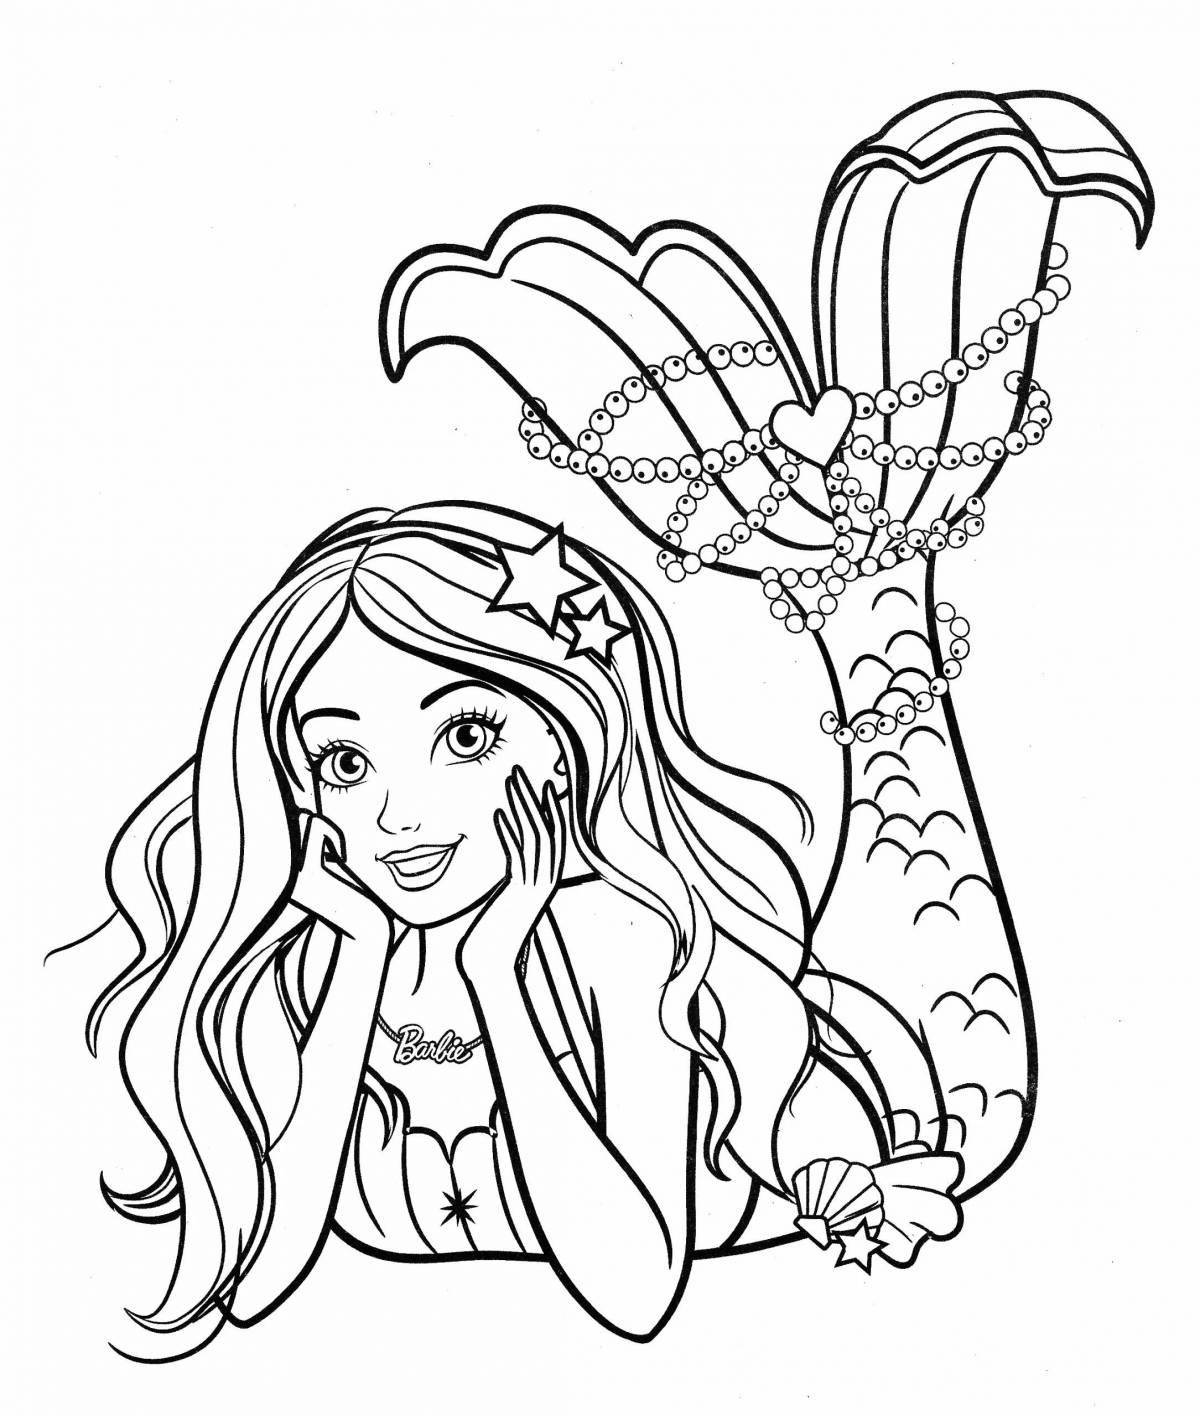 Fun coloring pages with mermaids for girls